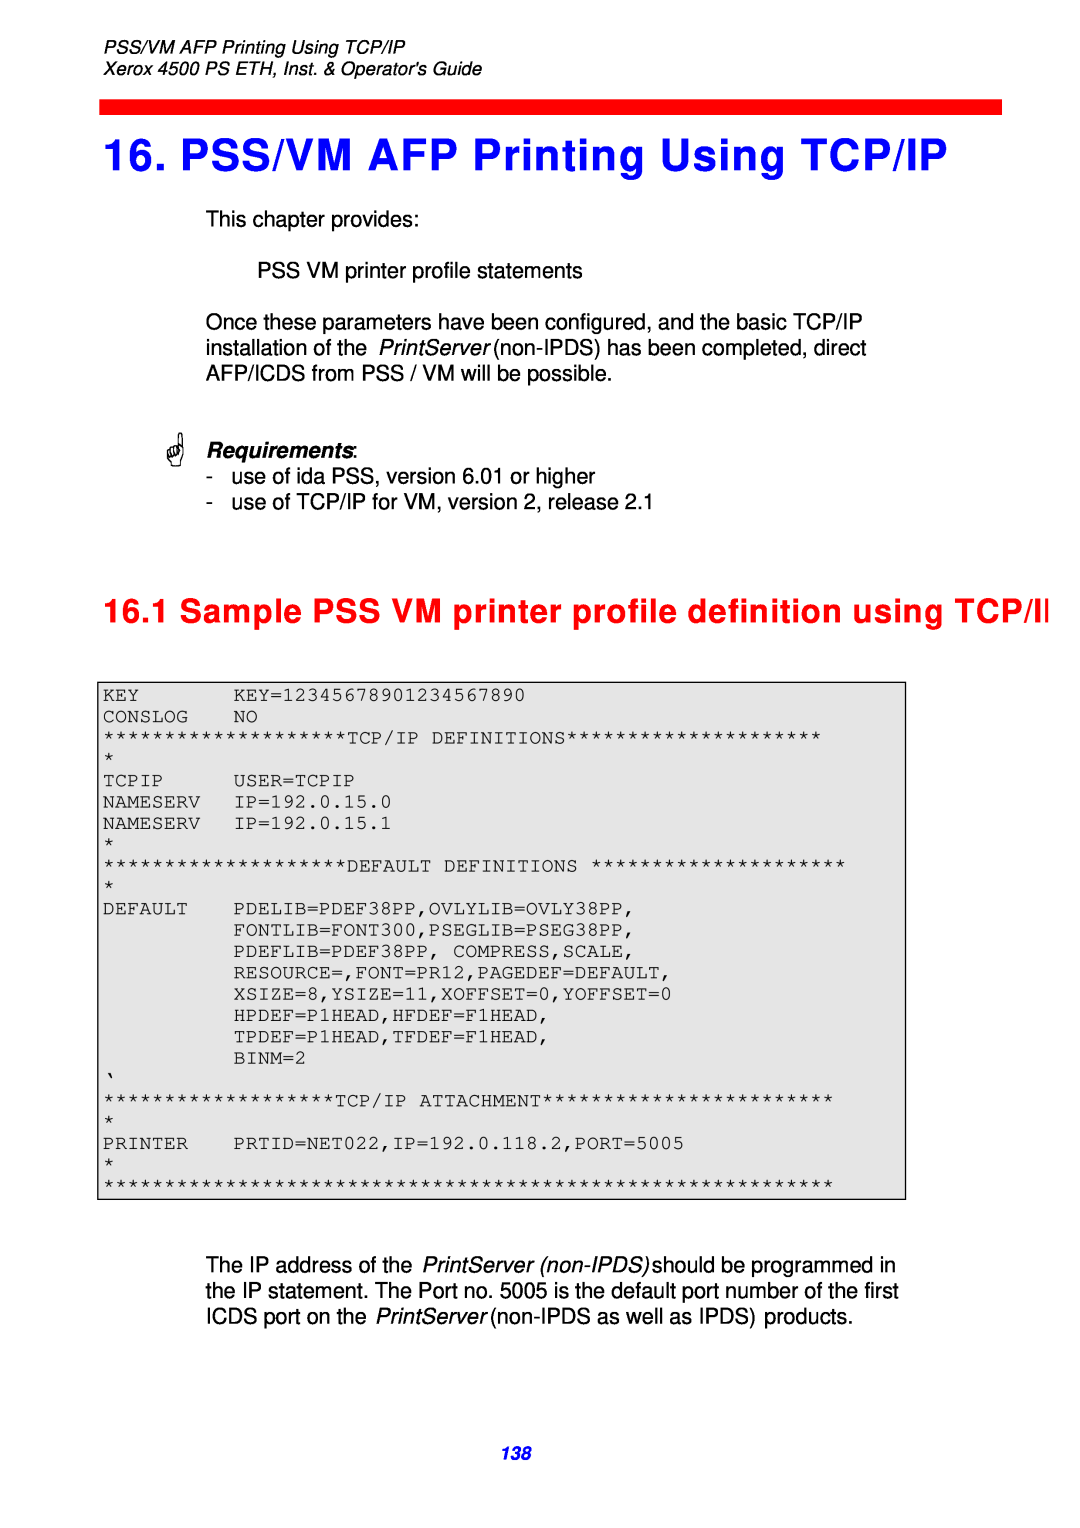 Xerox 4500 ps eth PSS/VM AFP Printing Using TCP/IP, Sample PSS VM printer profile definition using TCP/IP, Requirements 